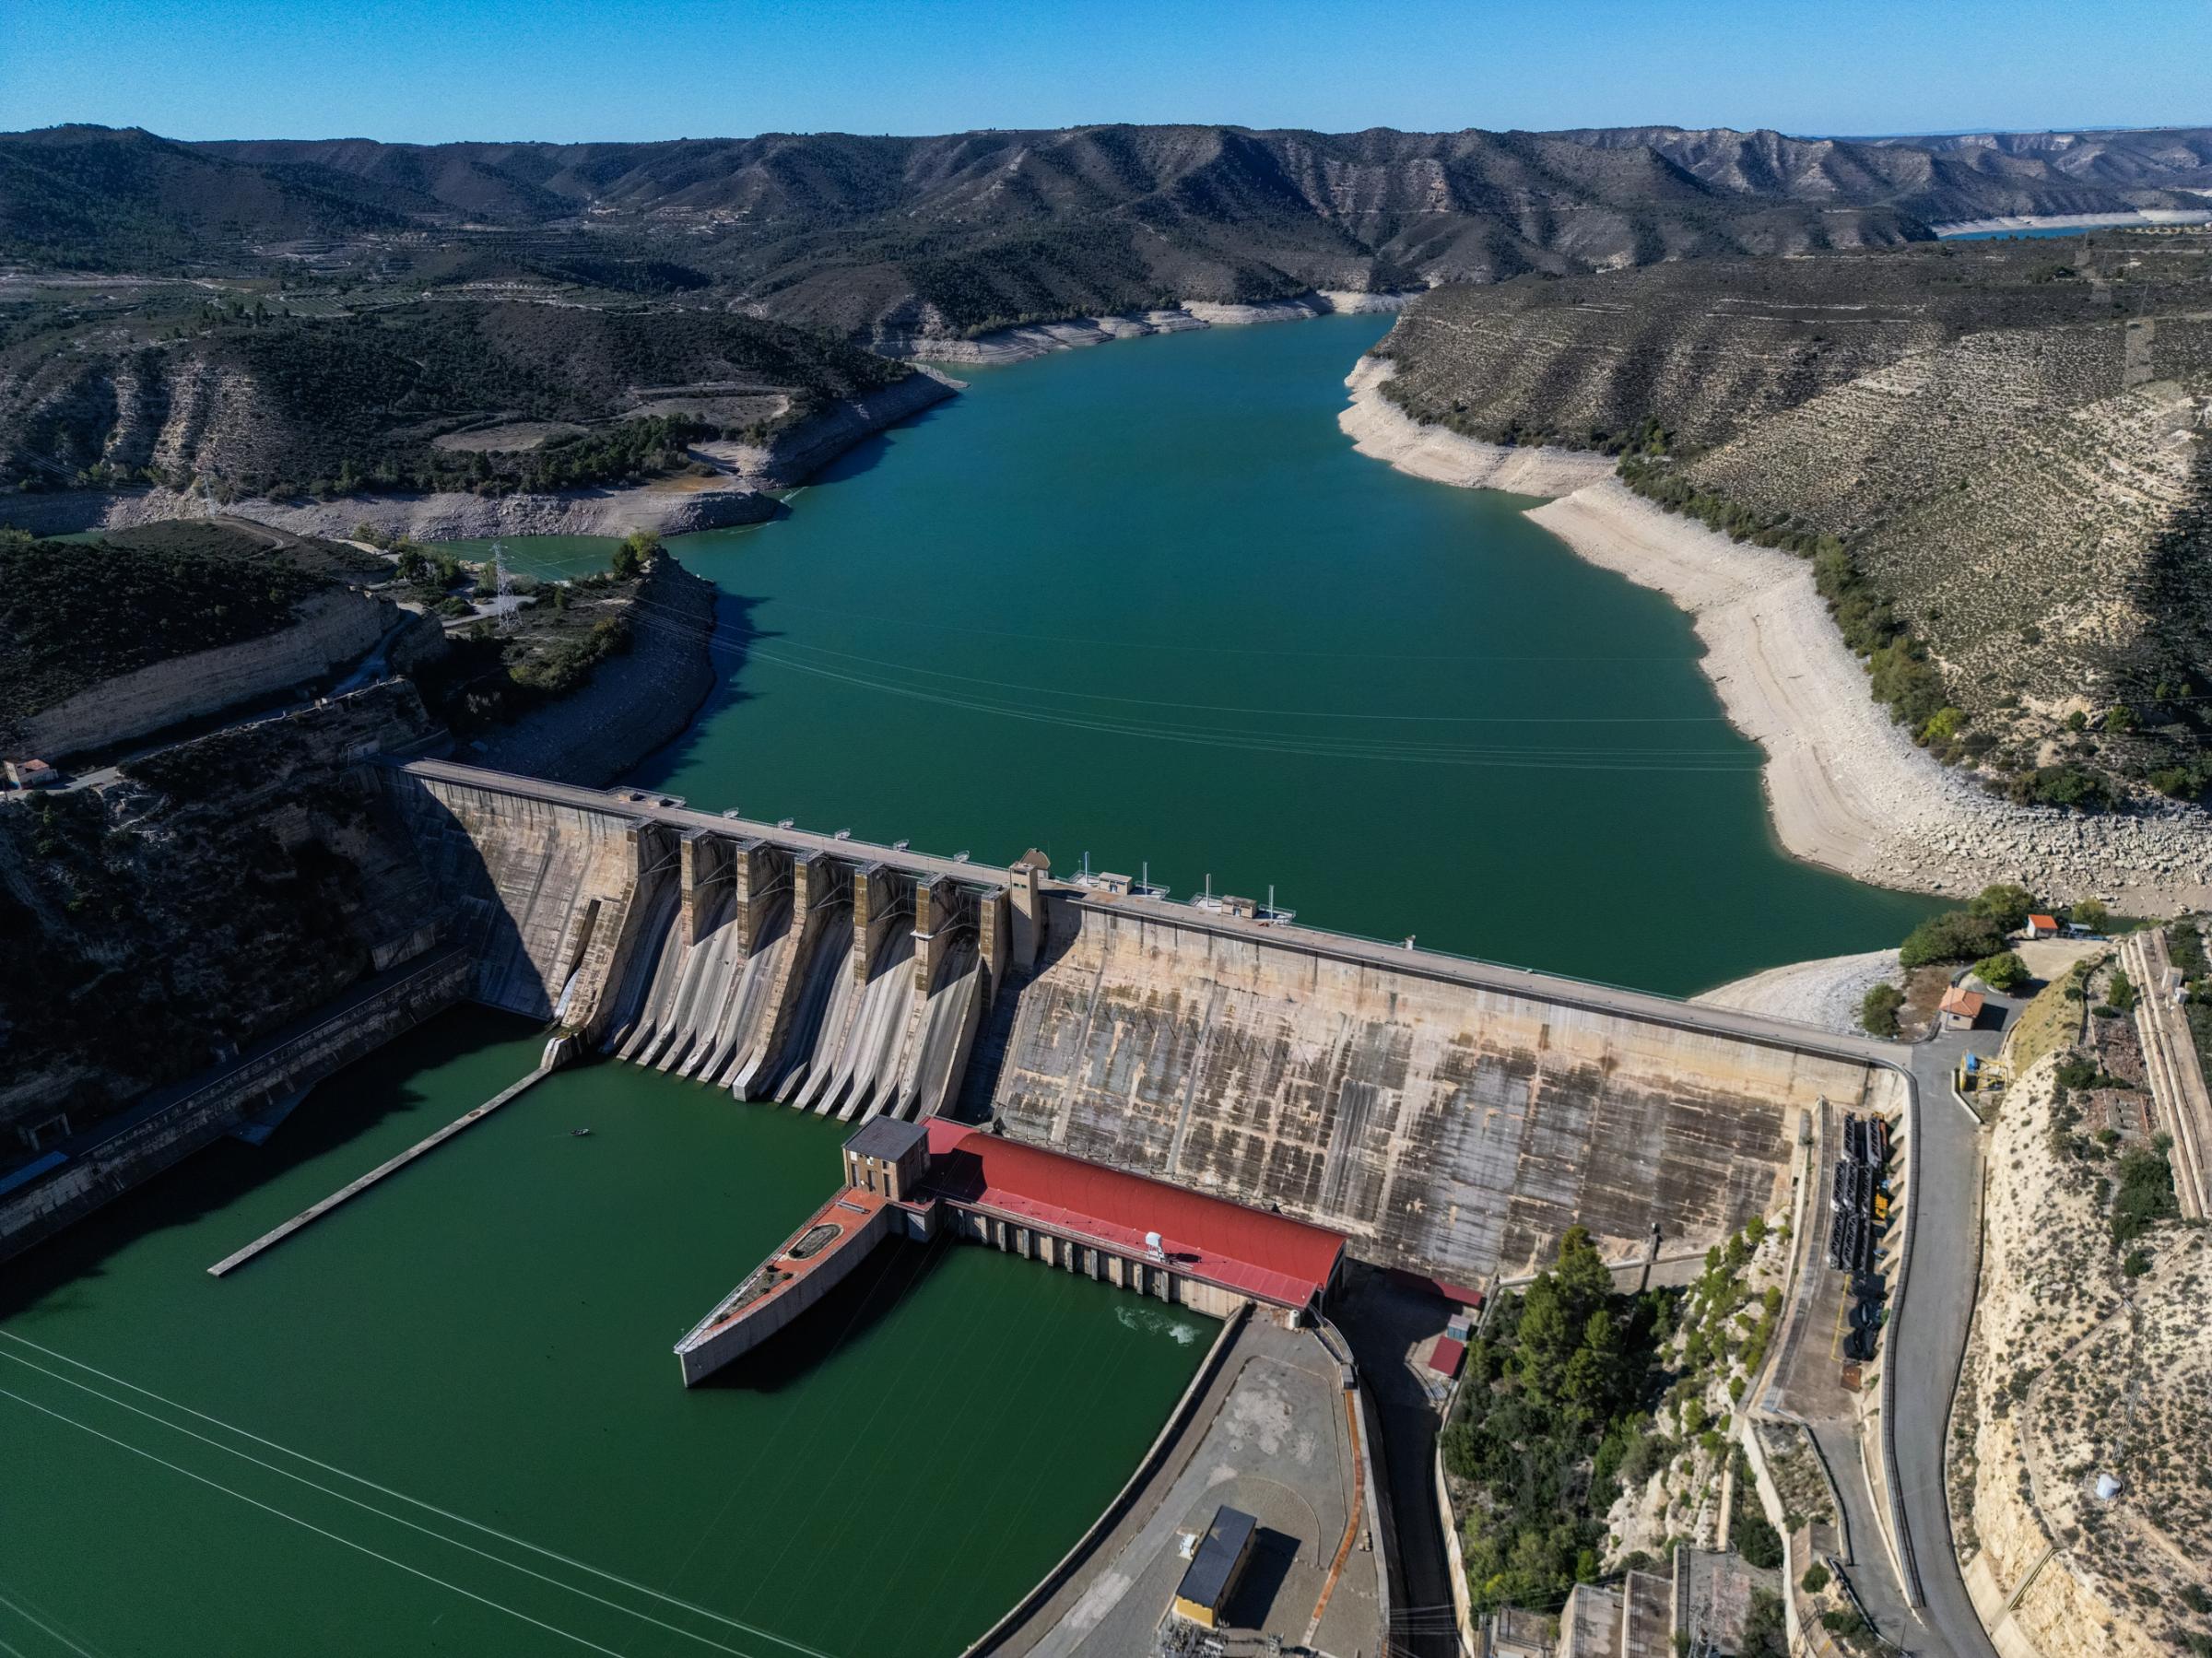 Spain's Drought Threatens Electricity Production At Mequinenza Plant - MEQUINENZA, SPAIN - NOVEMBER 05: the Mequinenza...